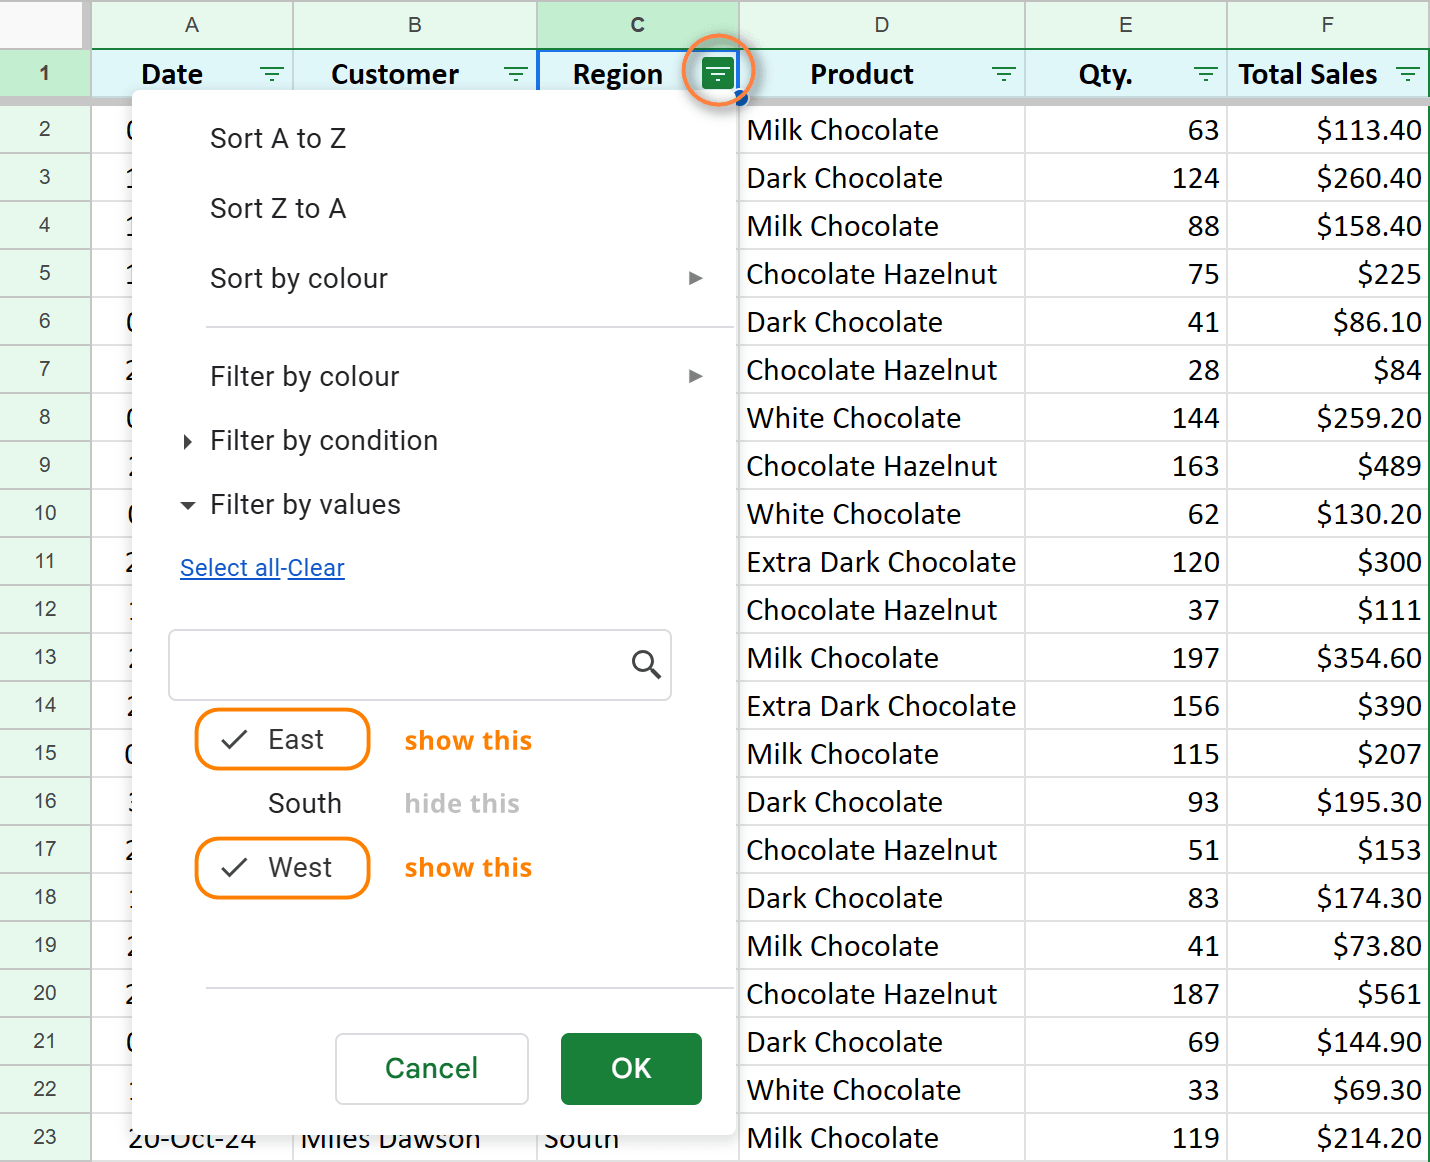 Set up Google Sheets filter based on cell values.